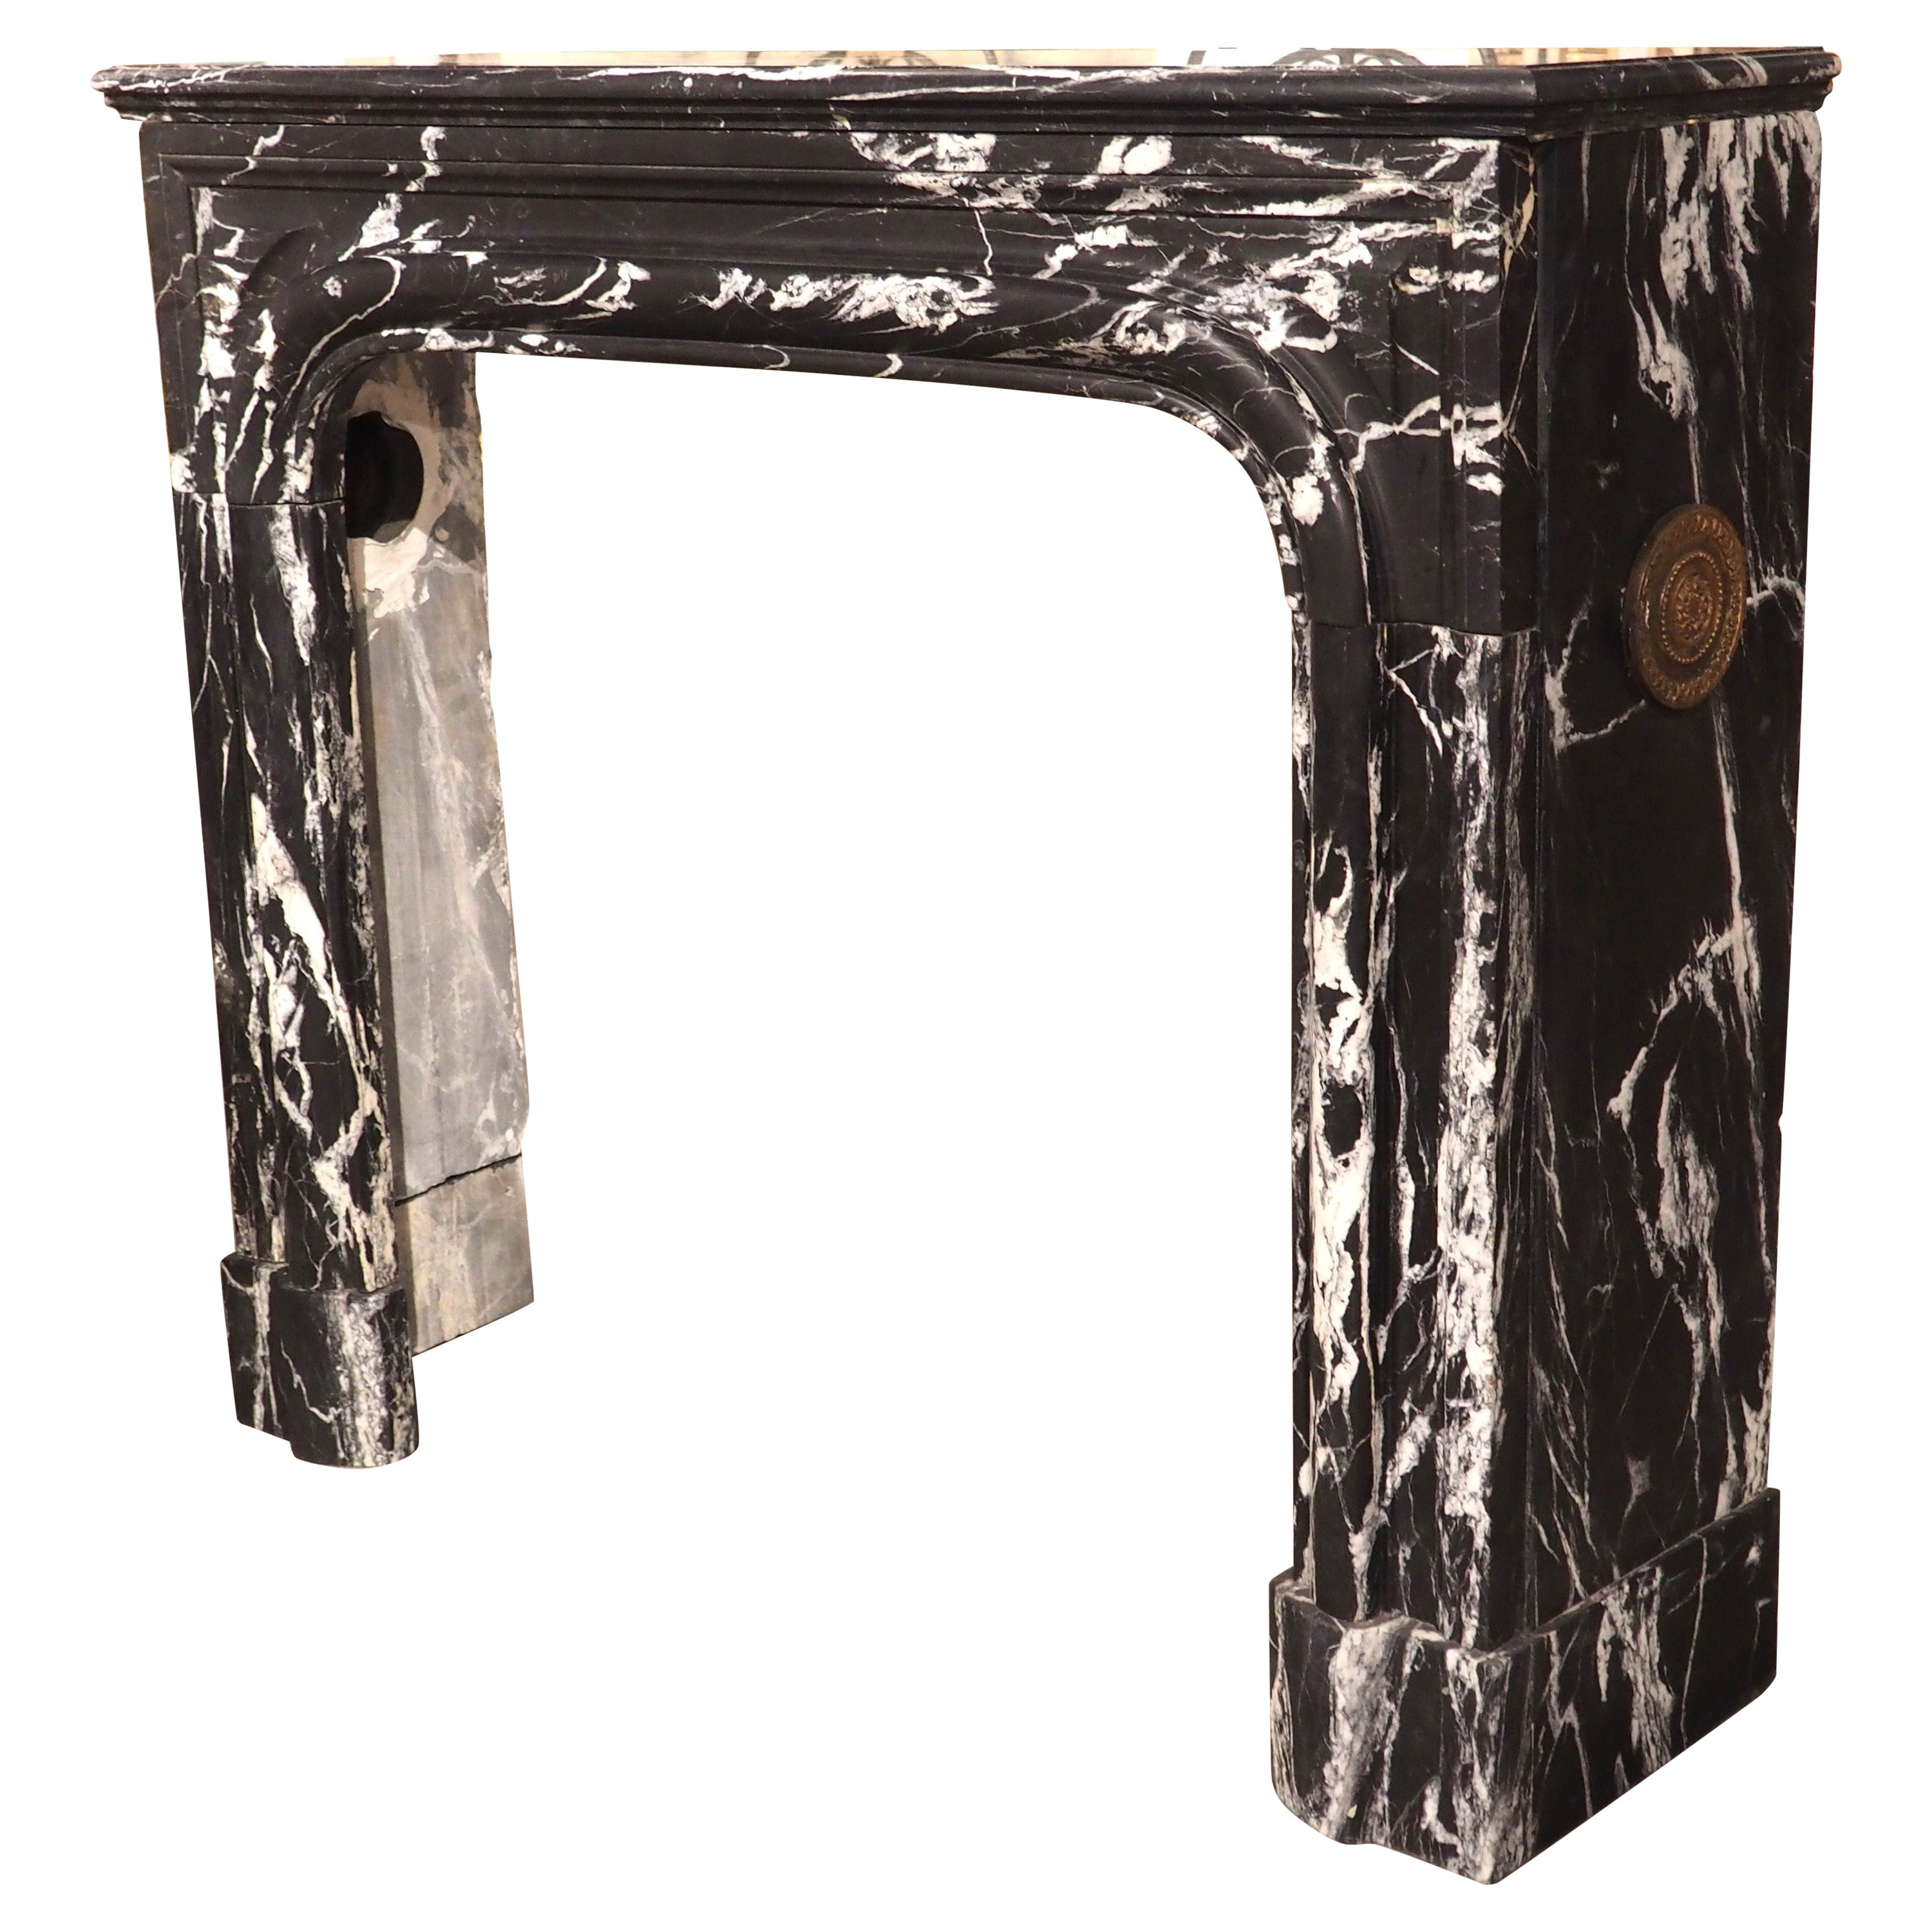 Antique French Nero Marquina Marble Fireplace Mantel, Circa 1880 For Sale